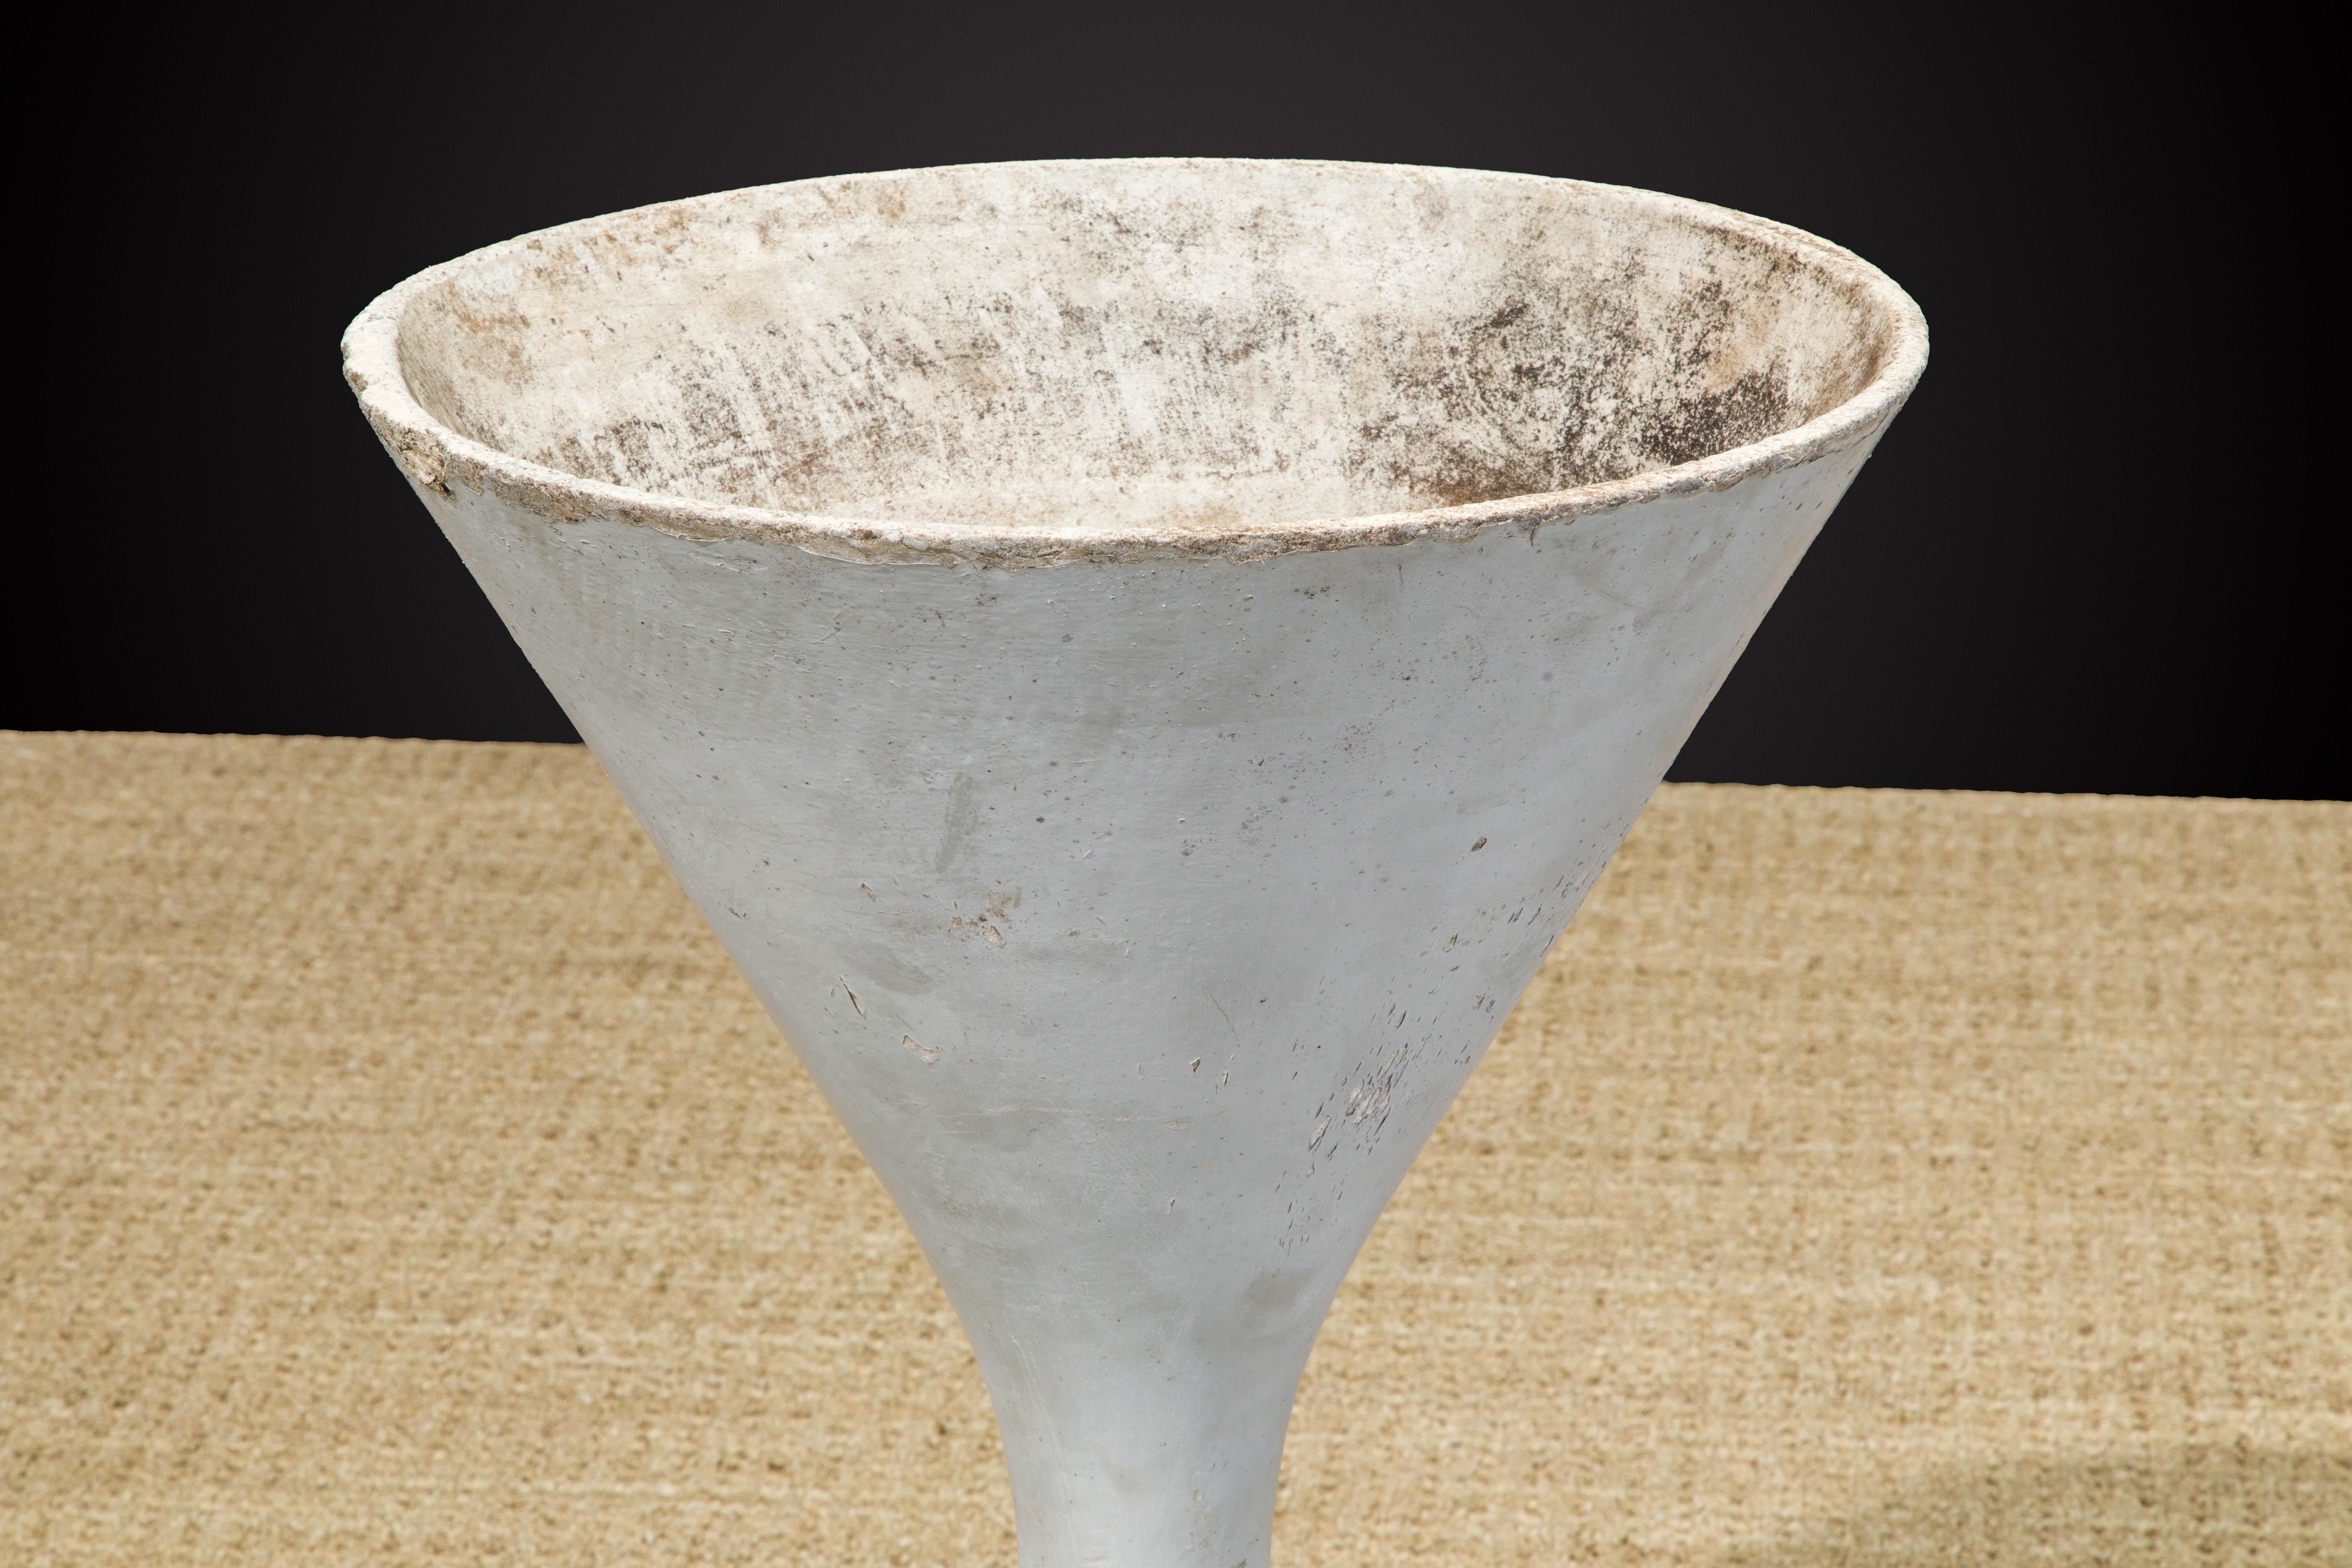 Swiss Willy Guhl for Eternit 'Diablo' Concrete Hourglass Planters, c 1968 For Sale